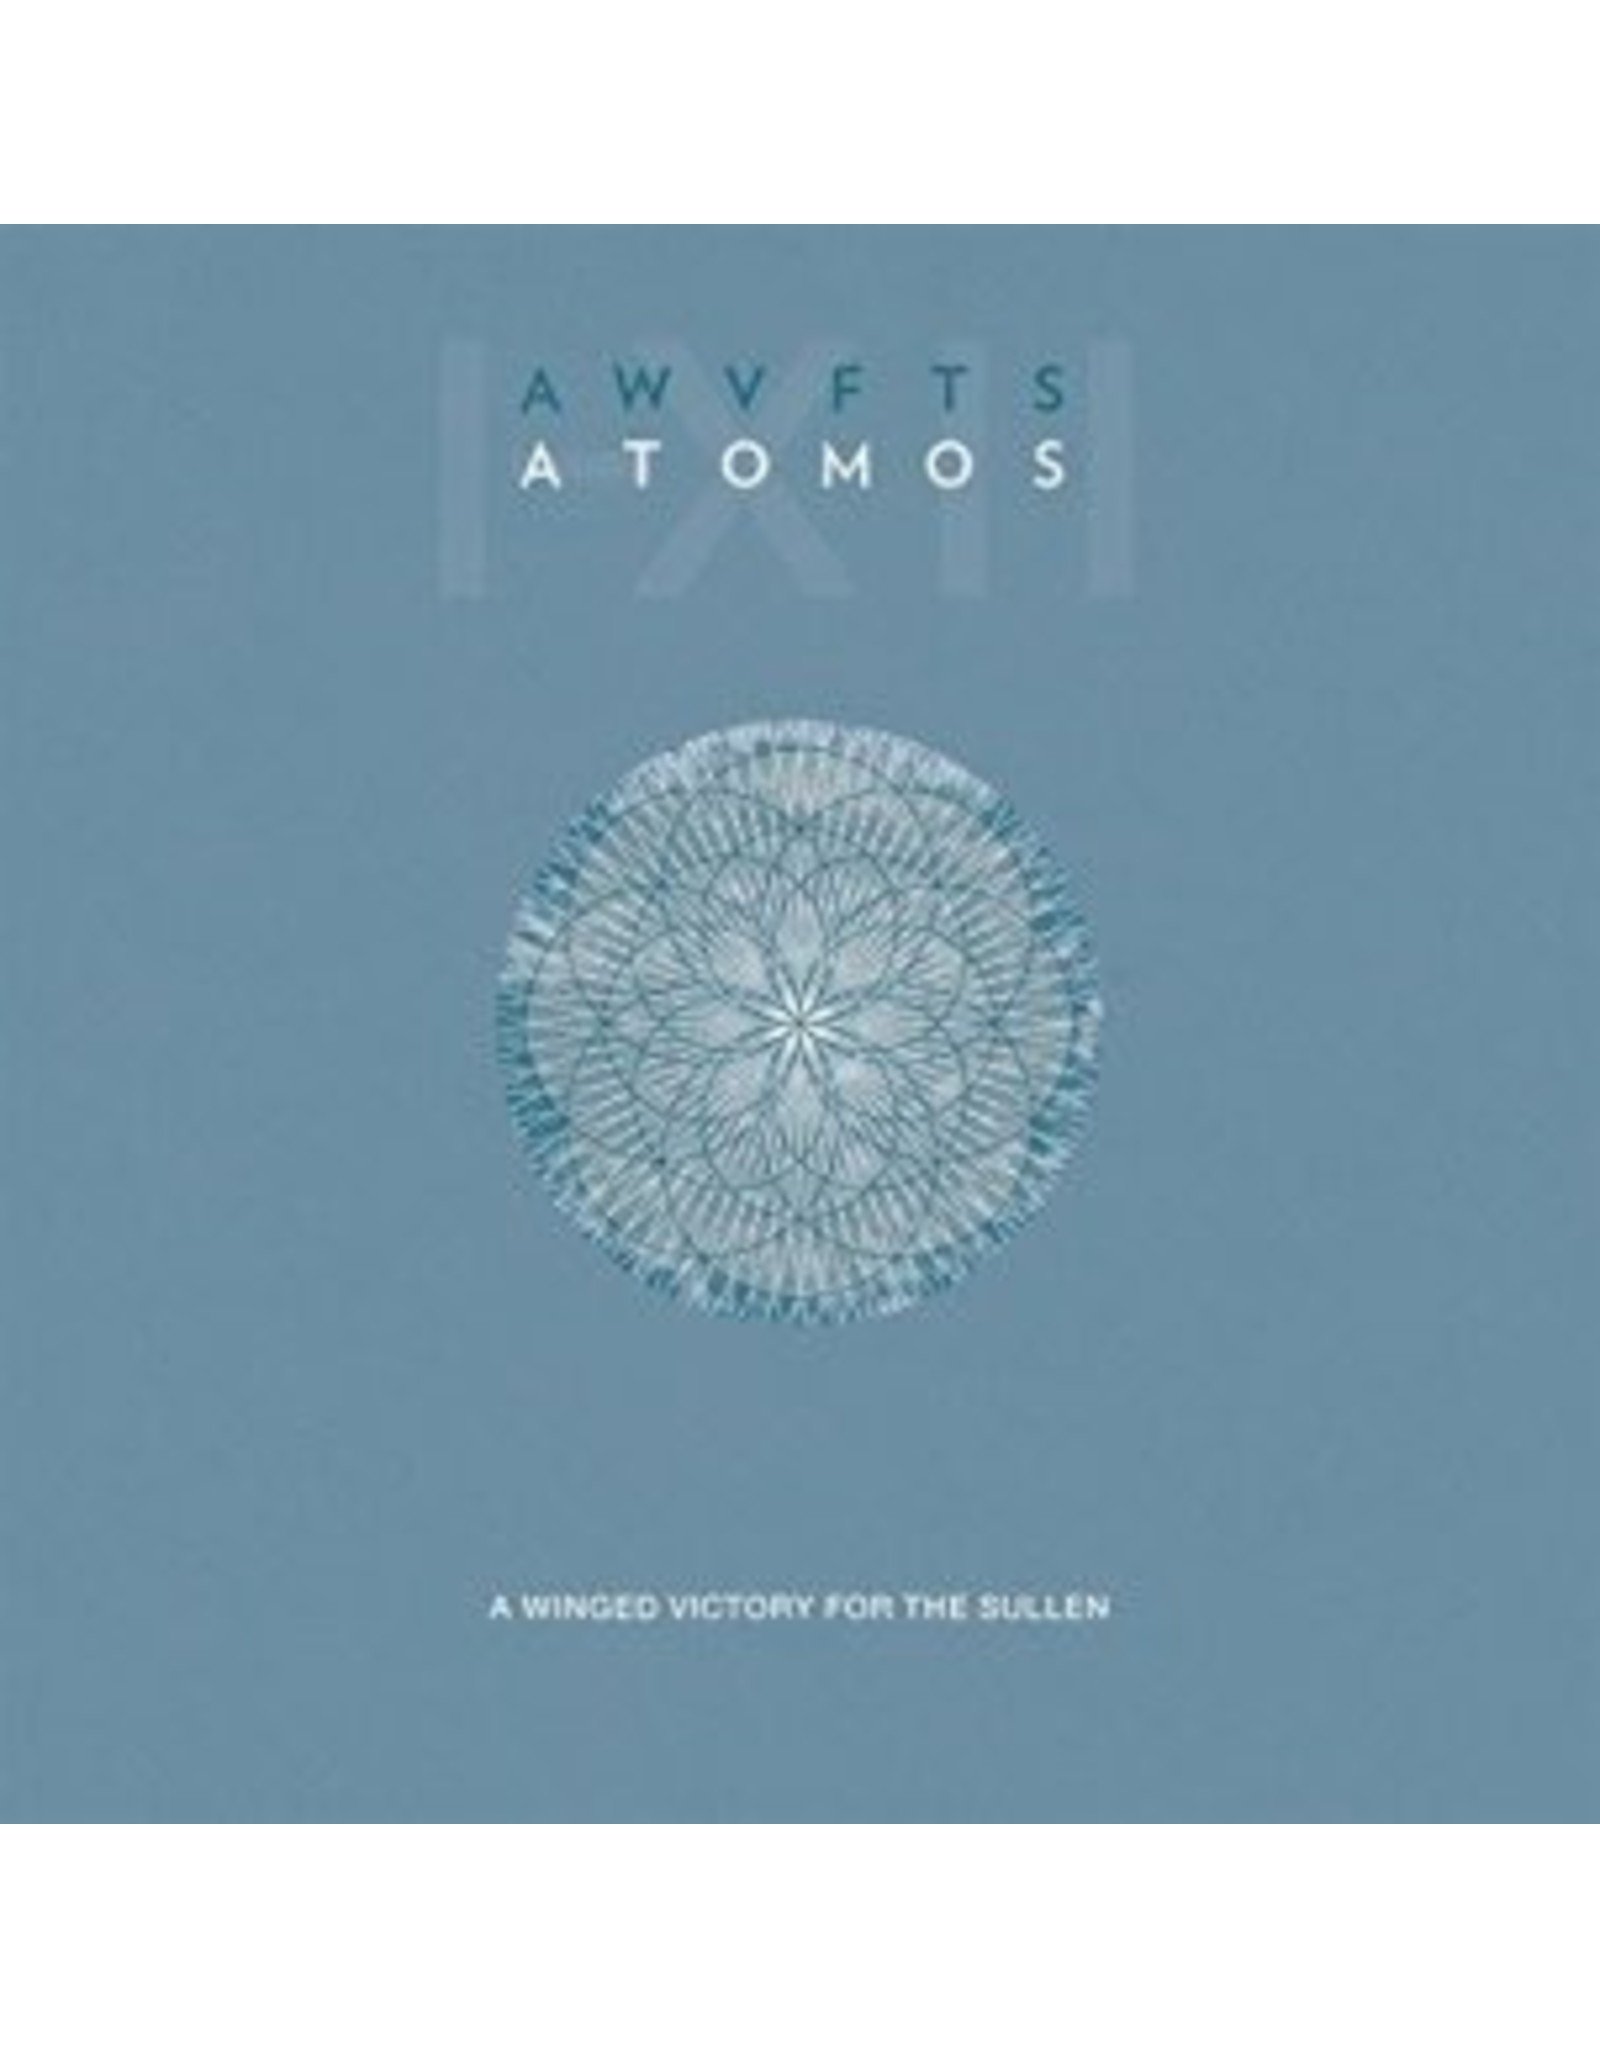 Kranky A Winged Victory for the Sullen: Atomos LP